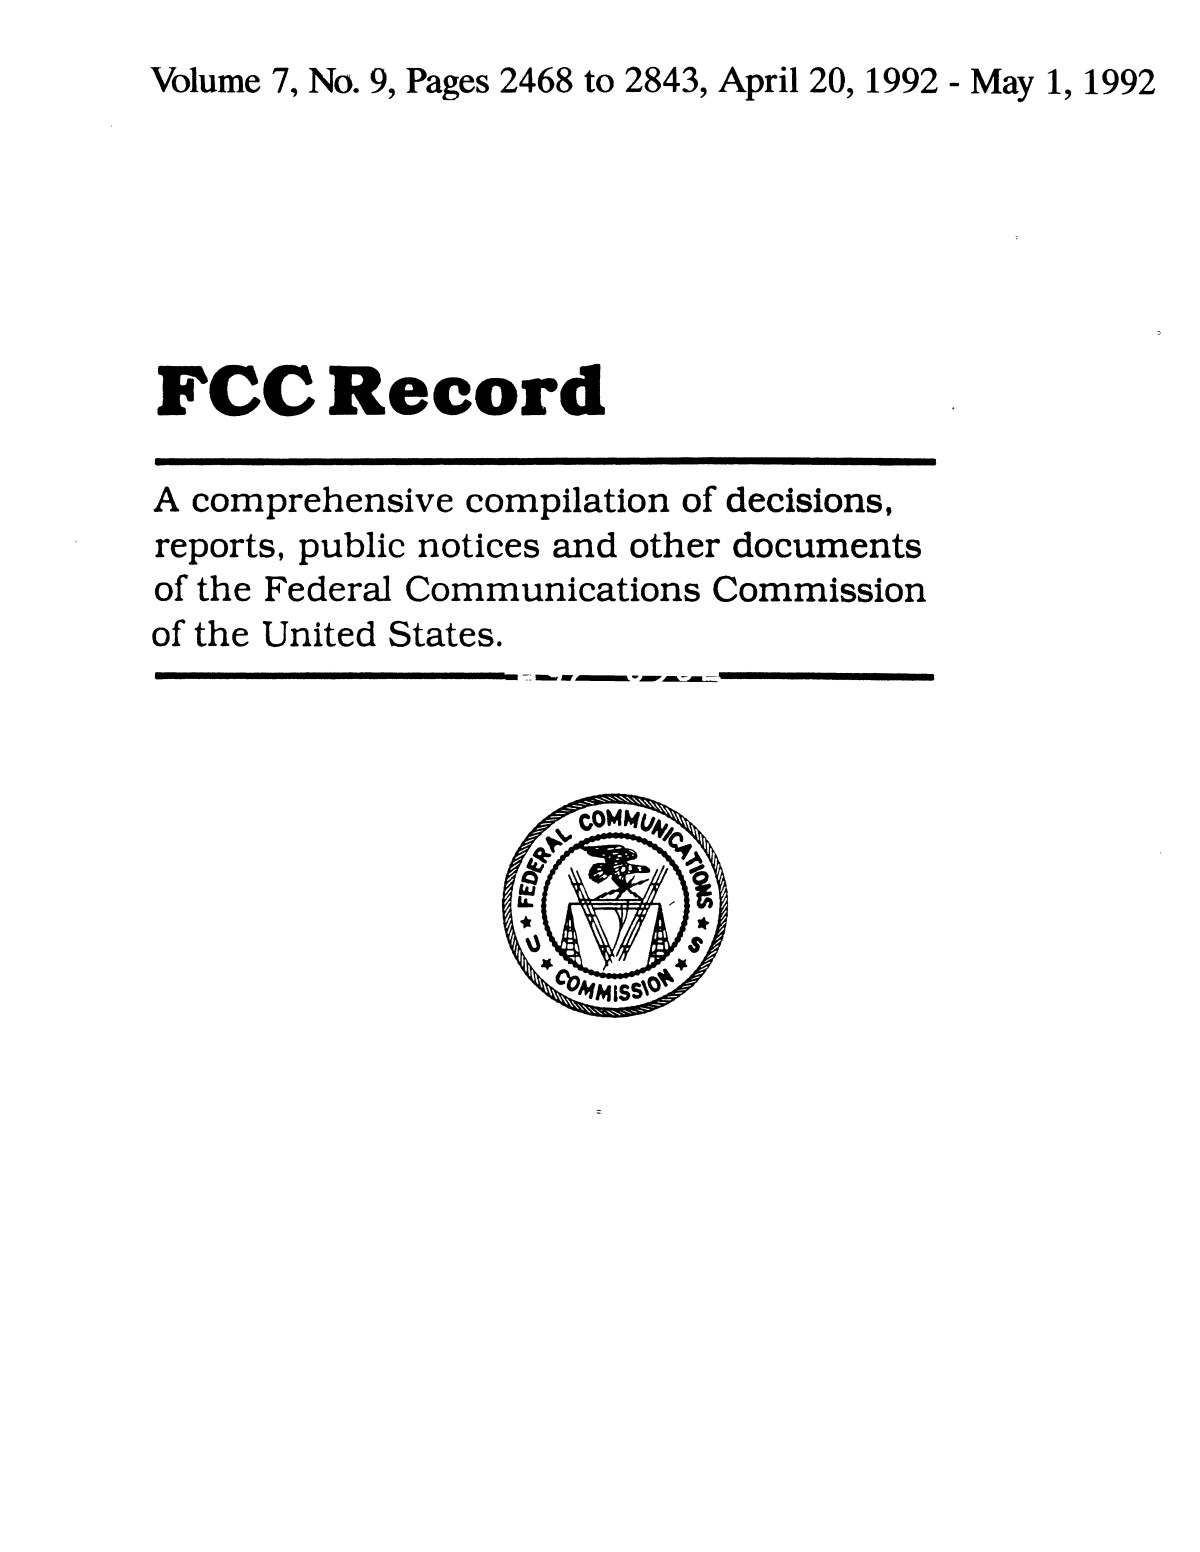 FCC Record, Volume 7, No. 9, Pages 2468 to 2843, April 20 - May 1, 1992
                                                
                                                    Front Cover
                                                